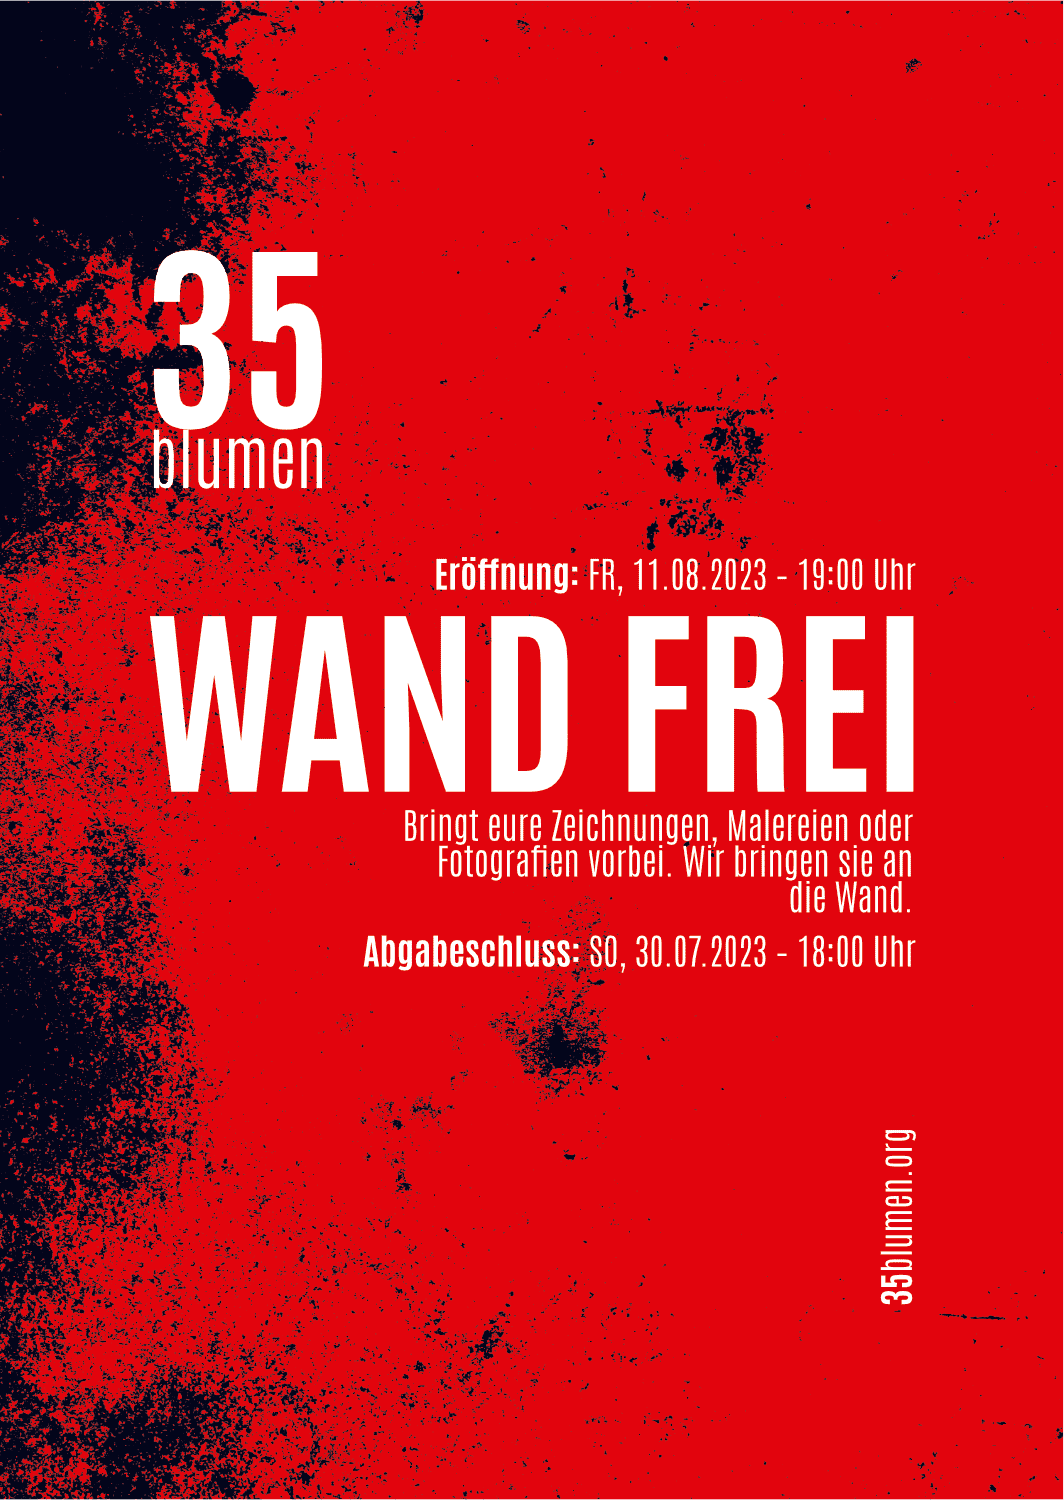 You are currently viewing 35blumen – Gruppenaustellung – “WAND FREI”